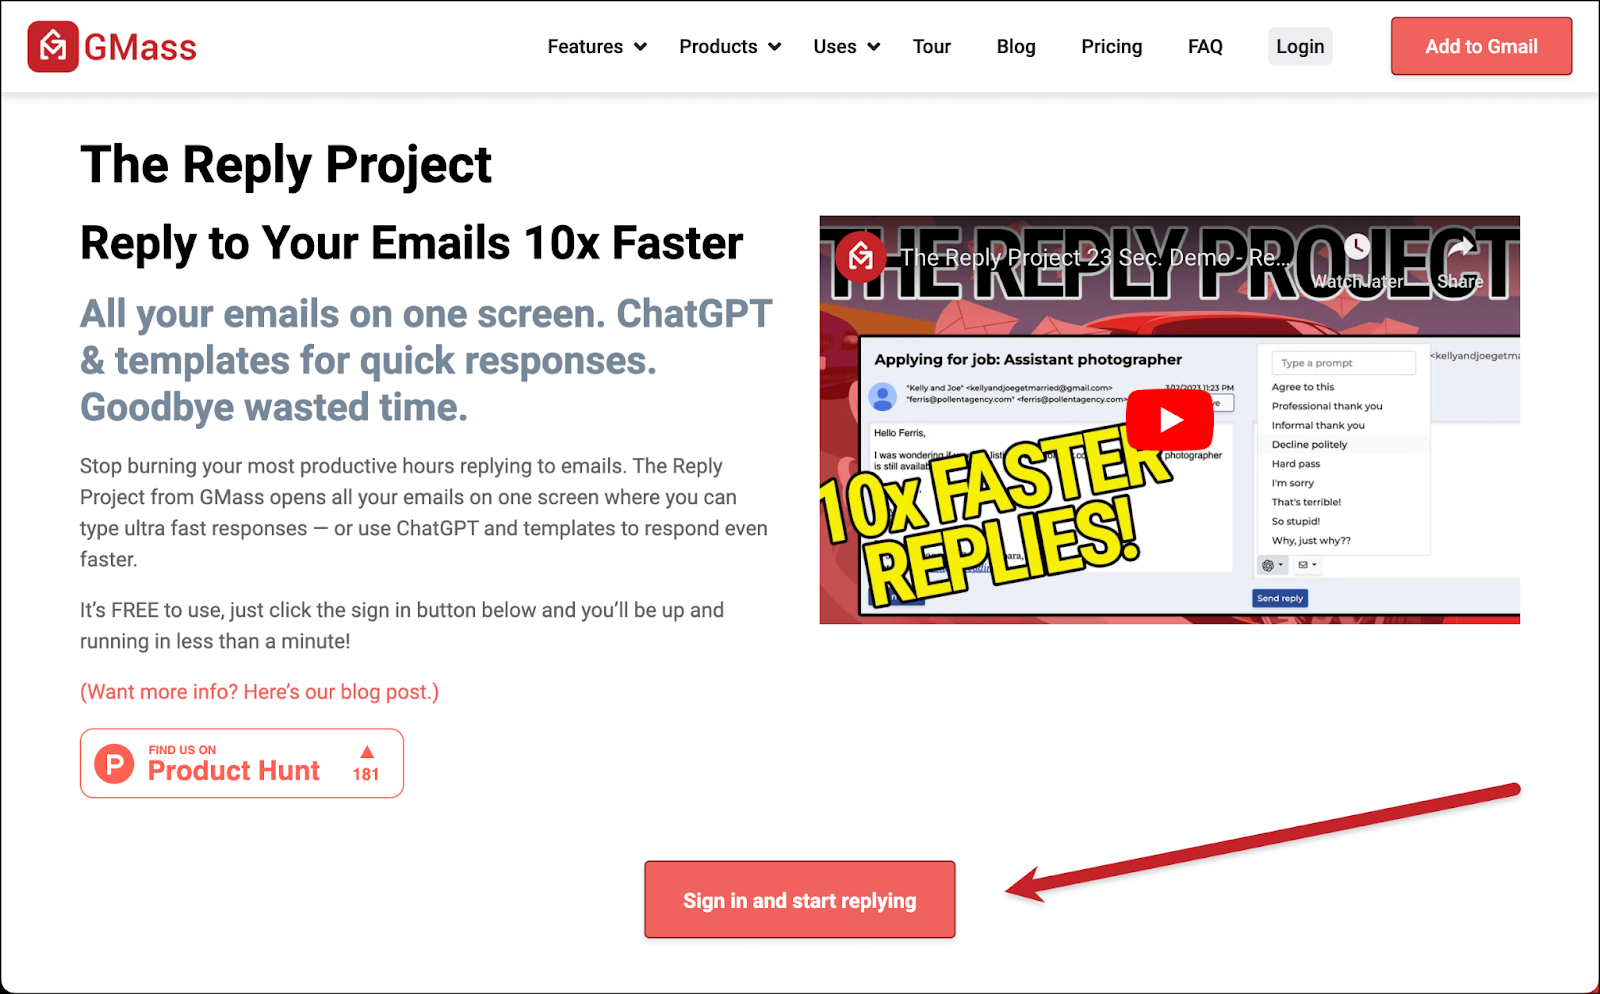 Sign in to The Reply Project